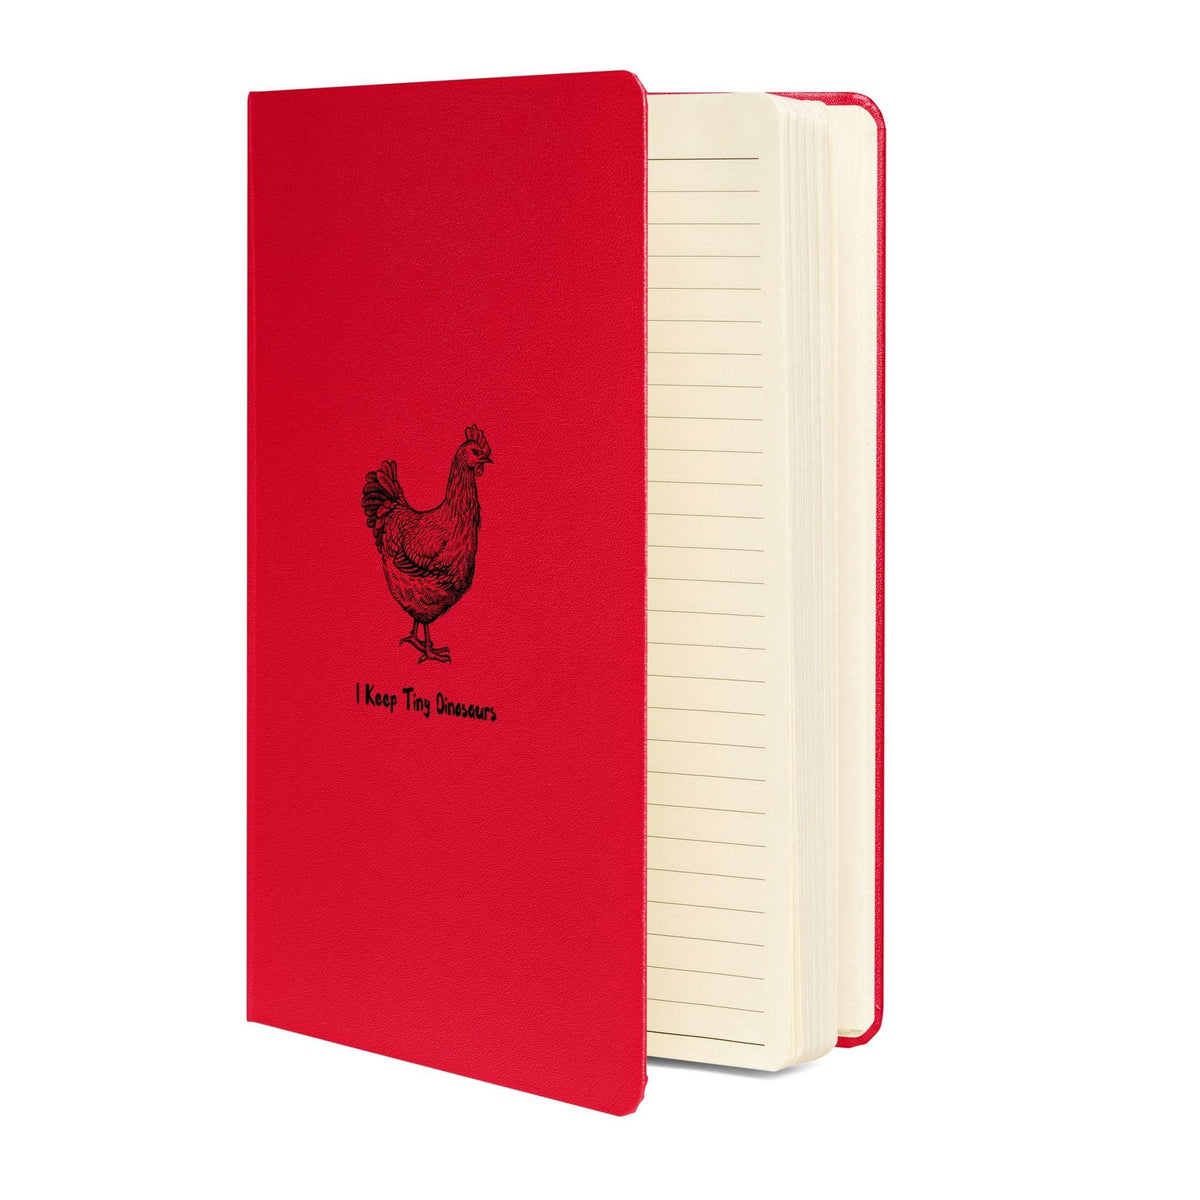 Chicken Tiny Dinosaurs Hardcover Bound Notebook - Cluck It All Farms